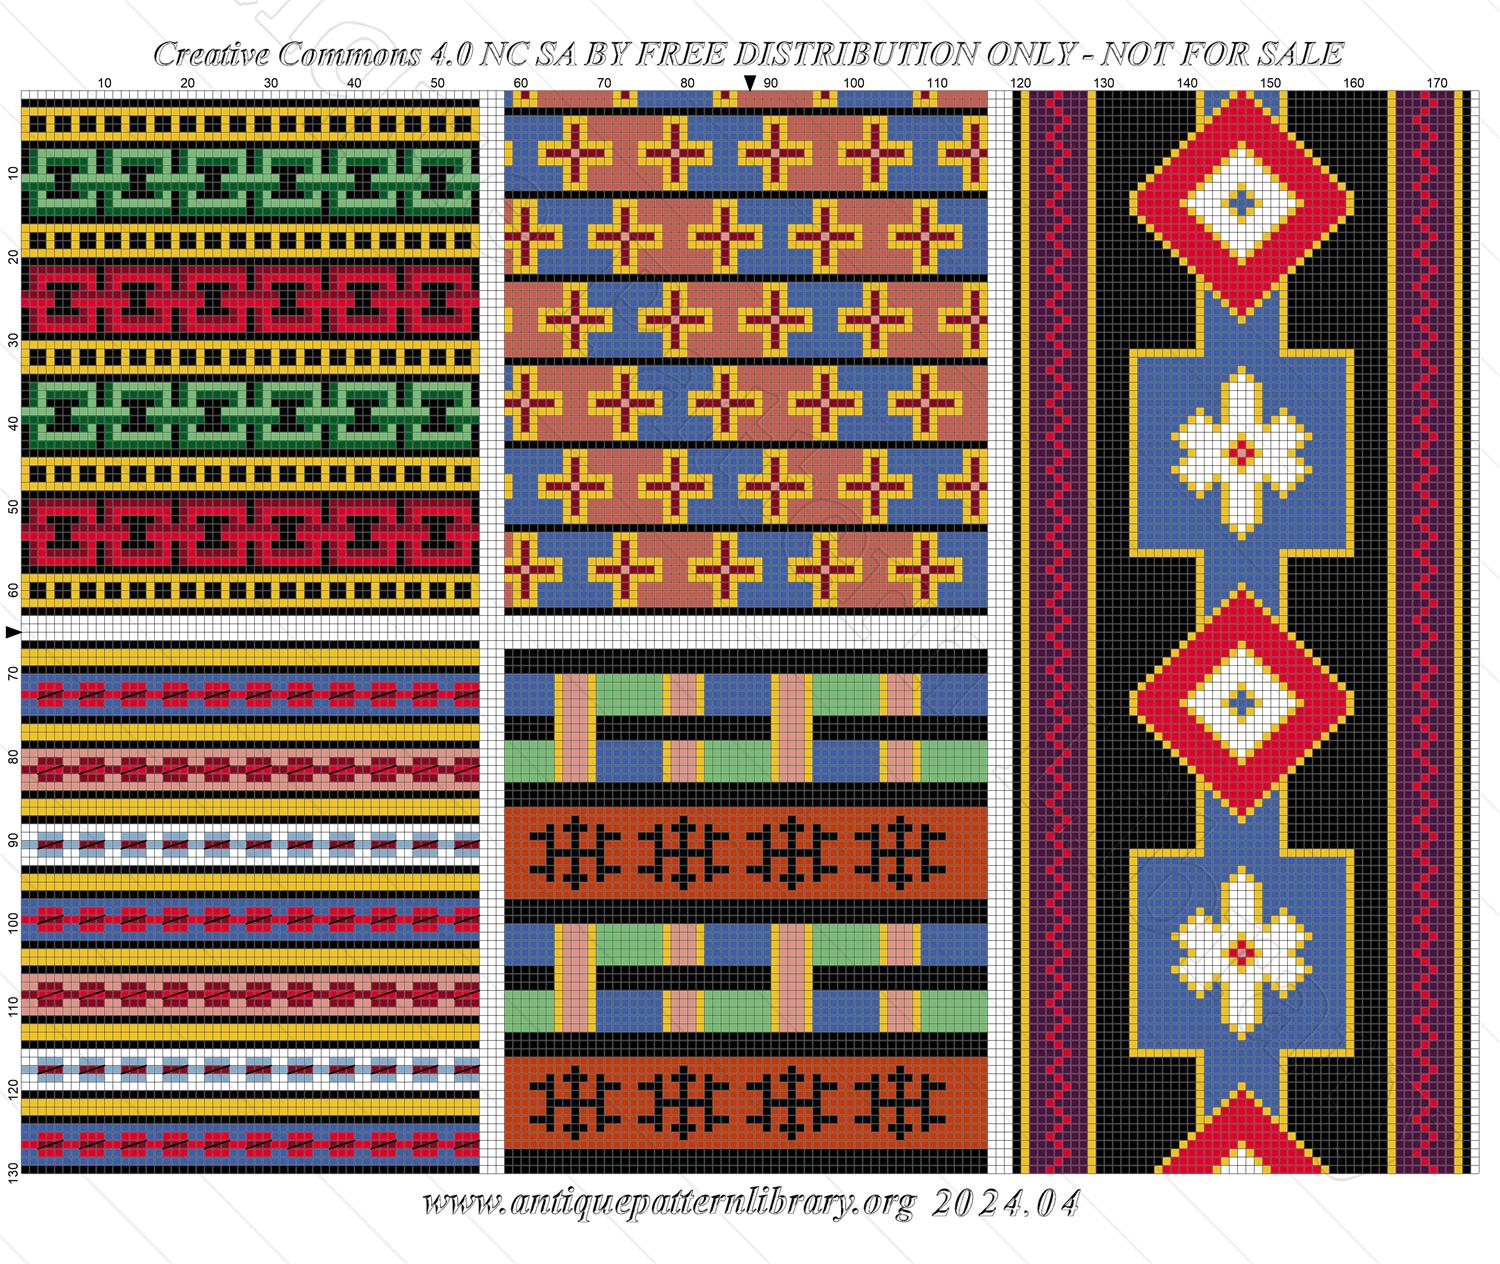 A-MH132 Four repeating patterns and a border design